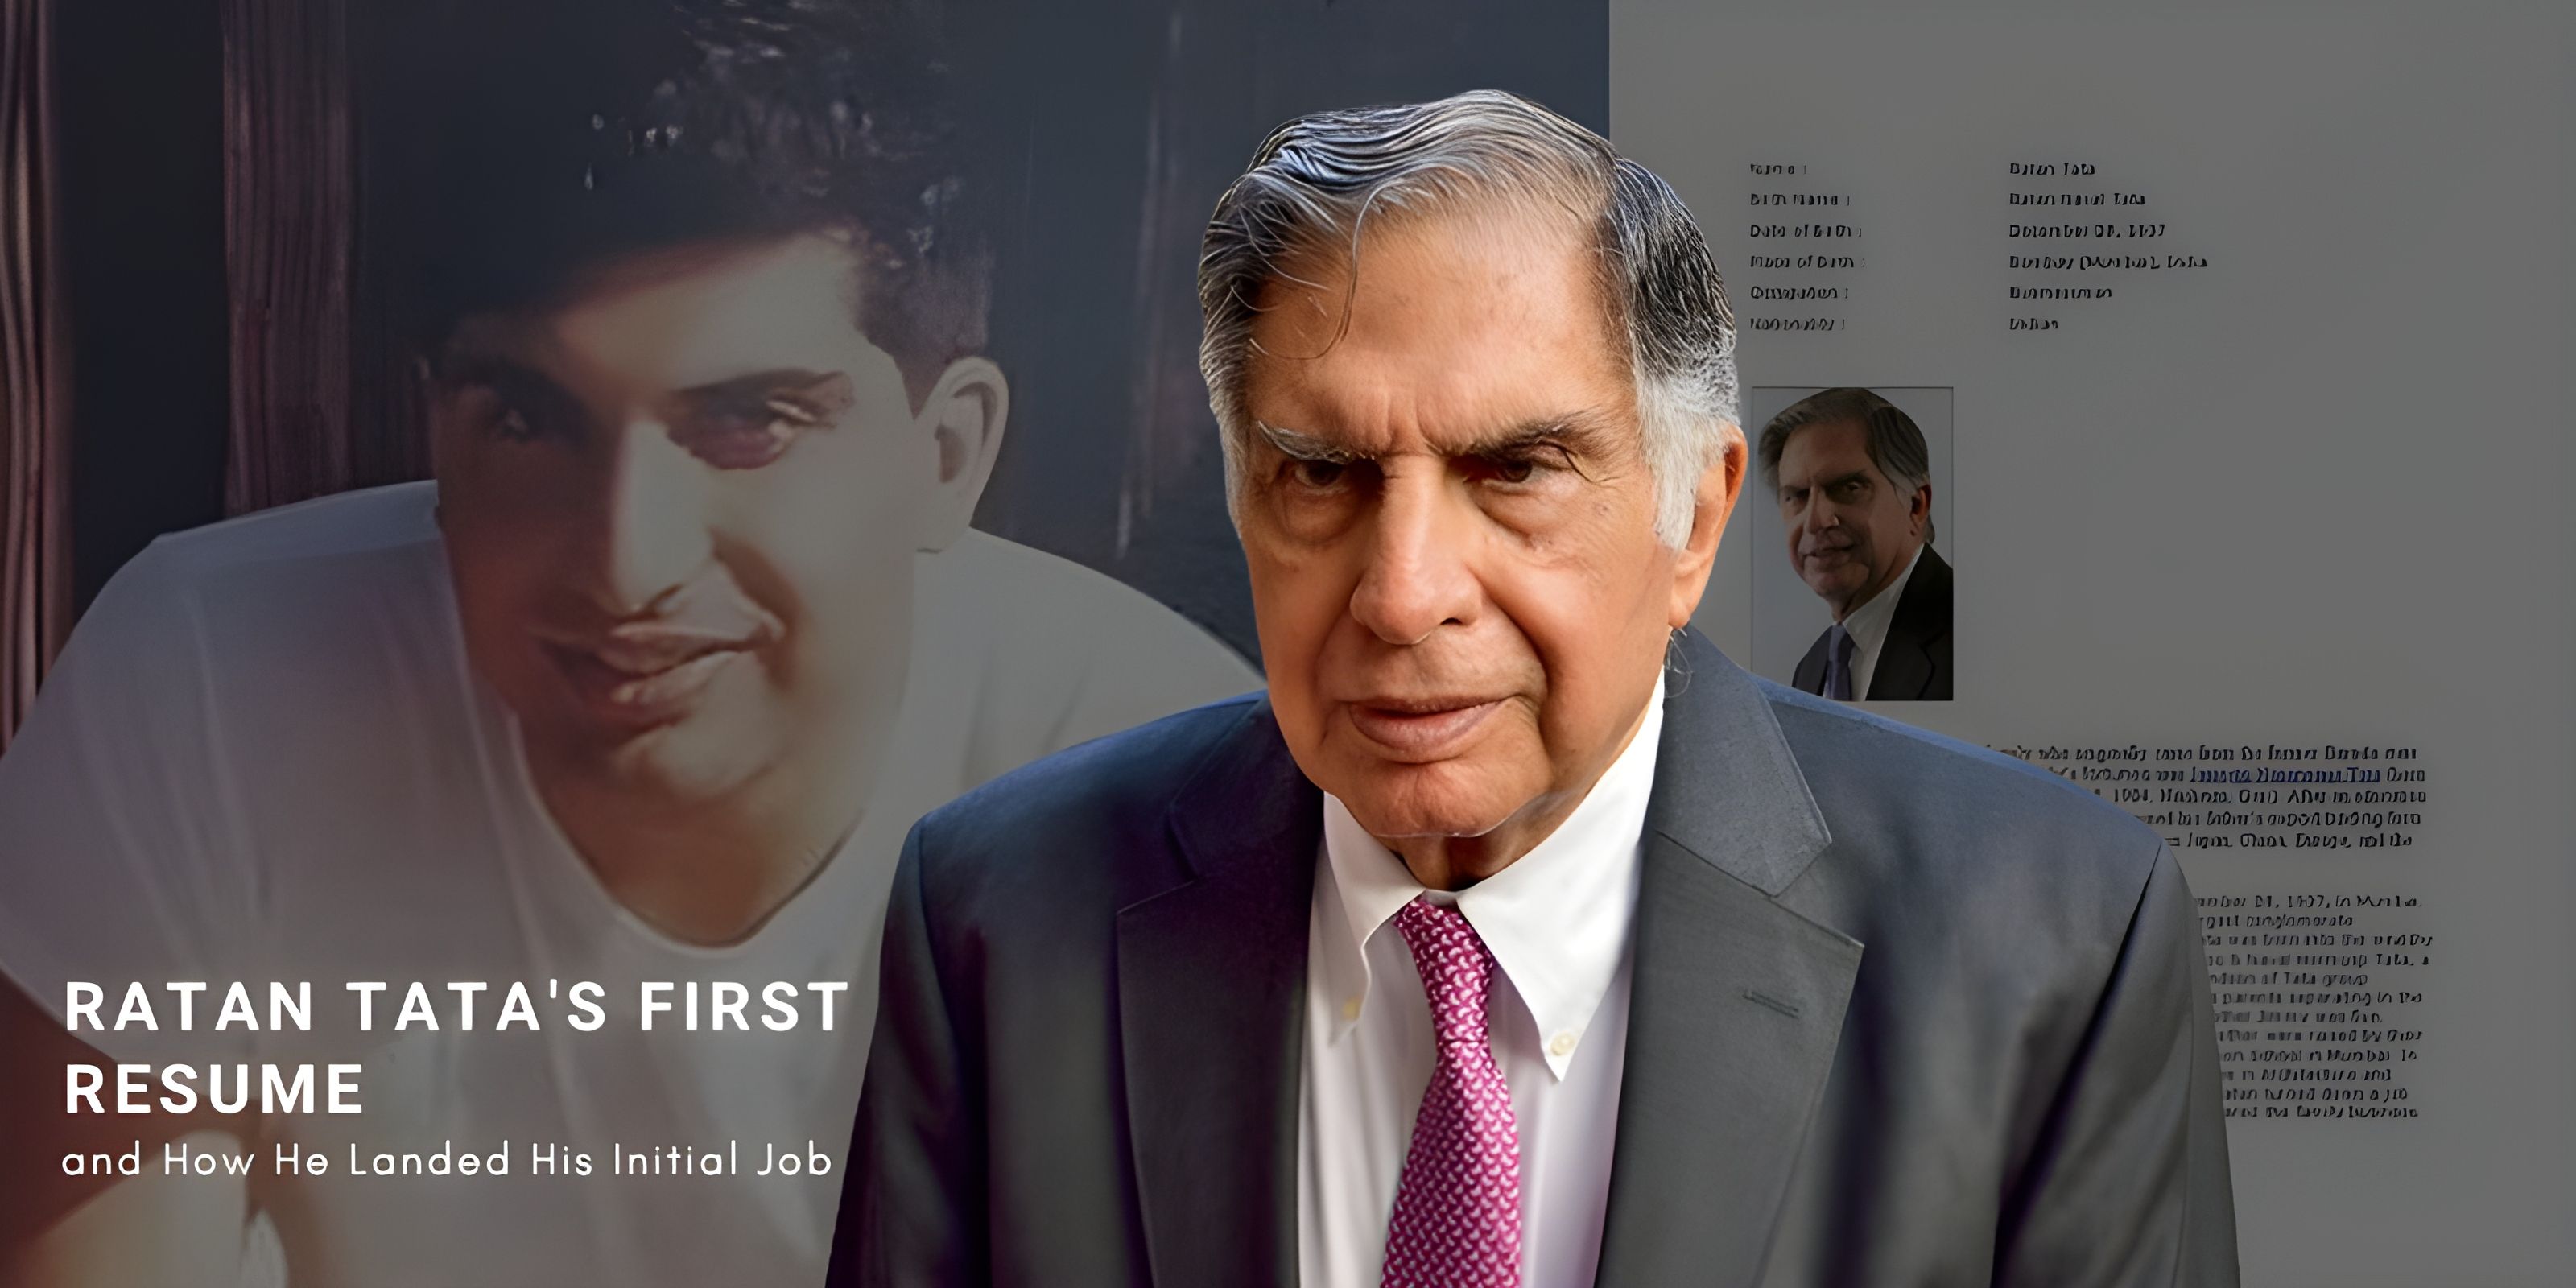 Ratan Tata's First Resume and How He Landed His Initial Job